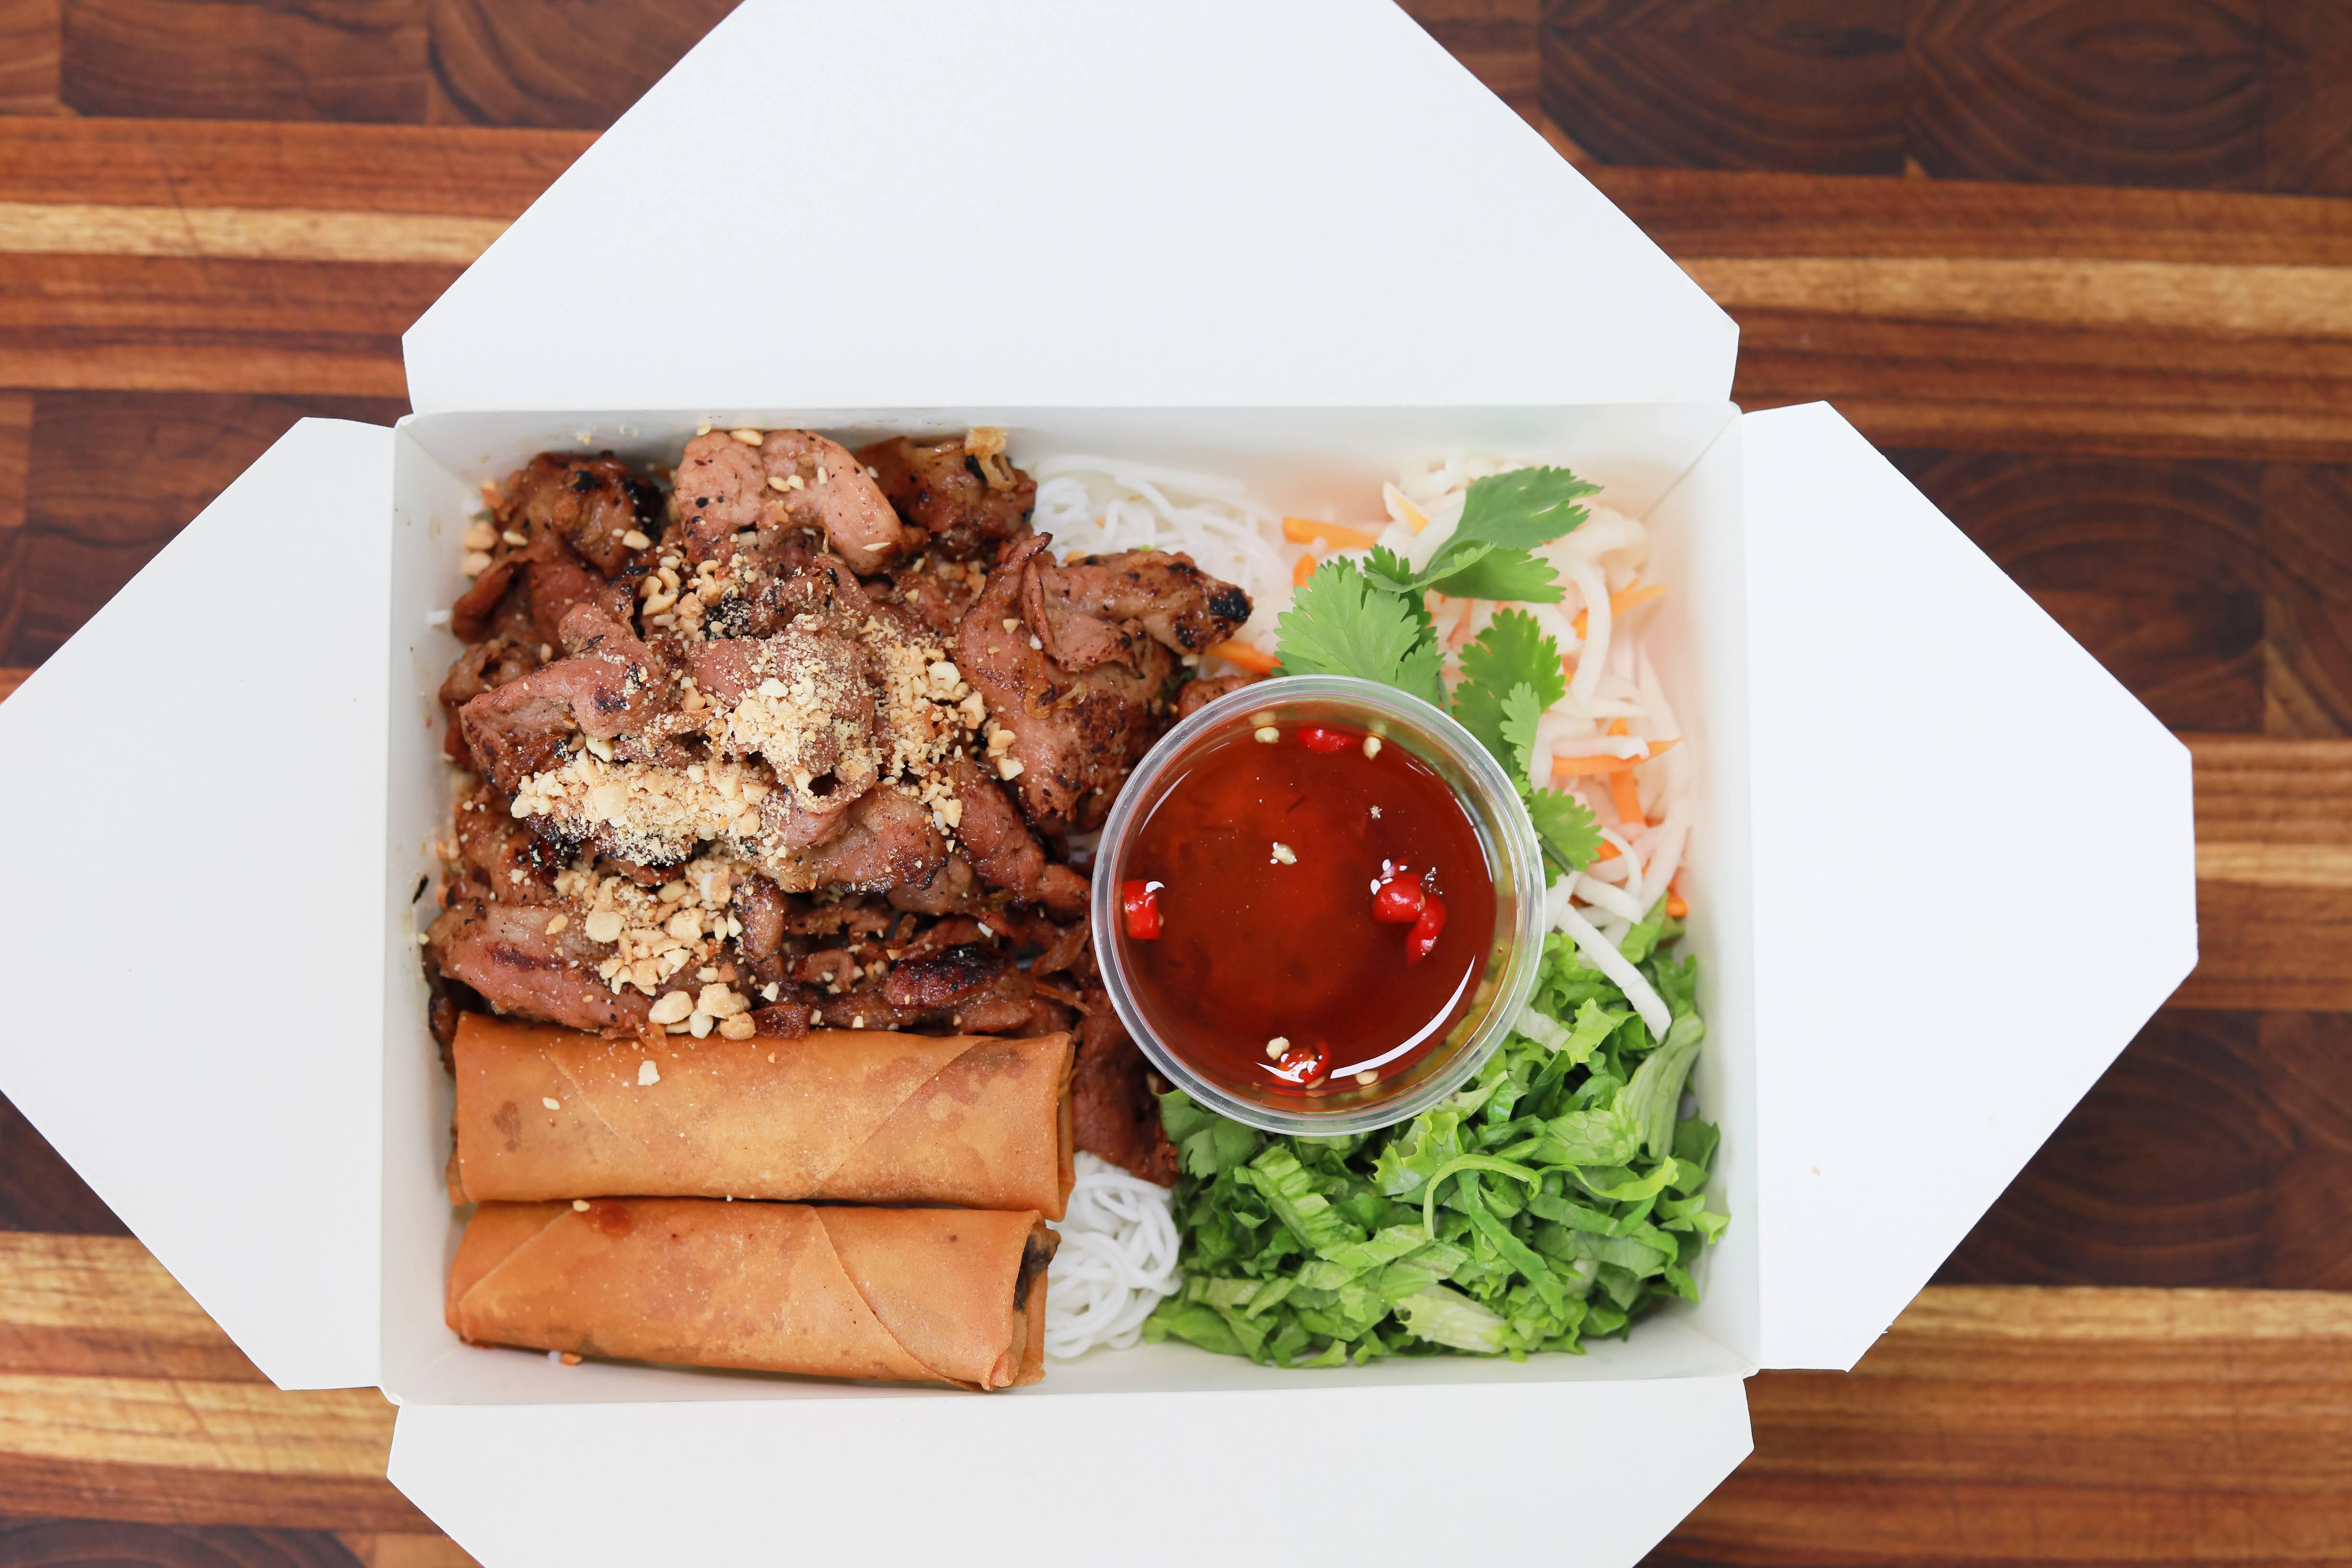 #13 Vermicelli with Grilled Pork & Egg Rolls